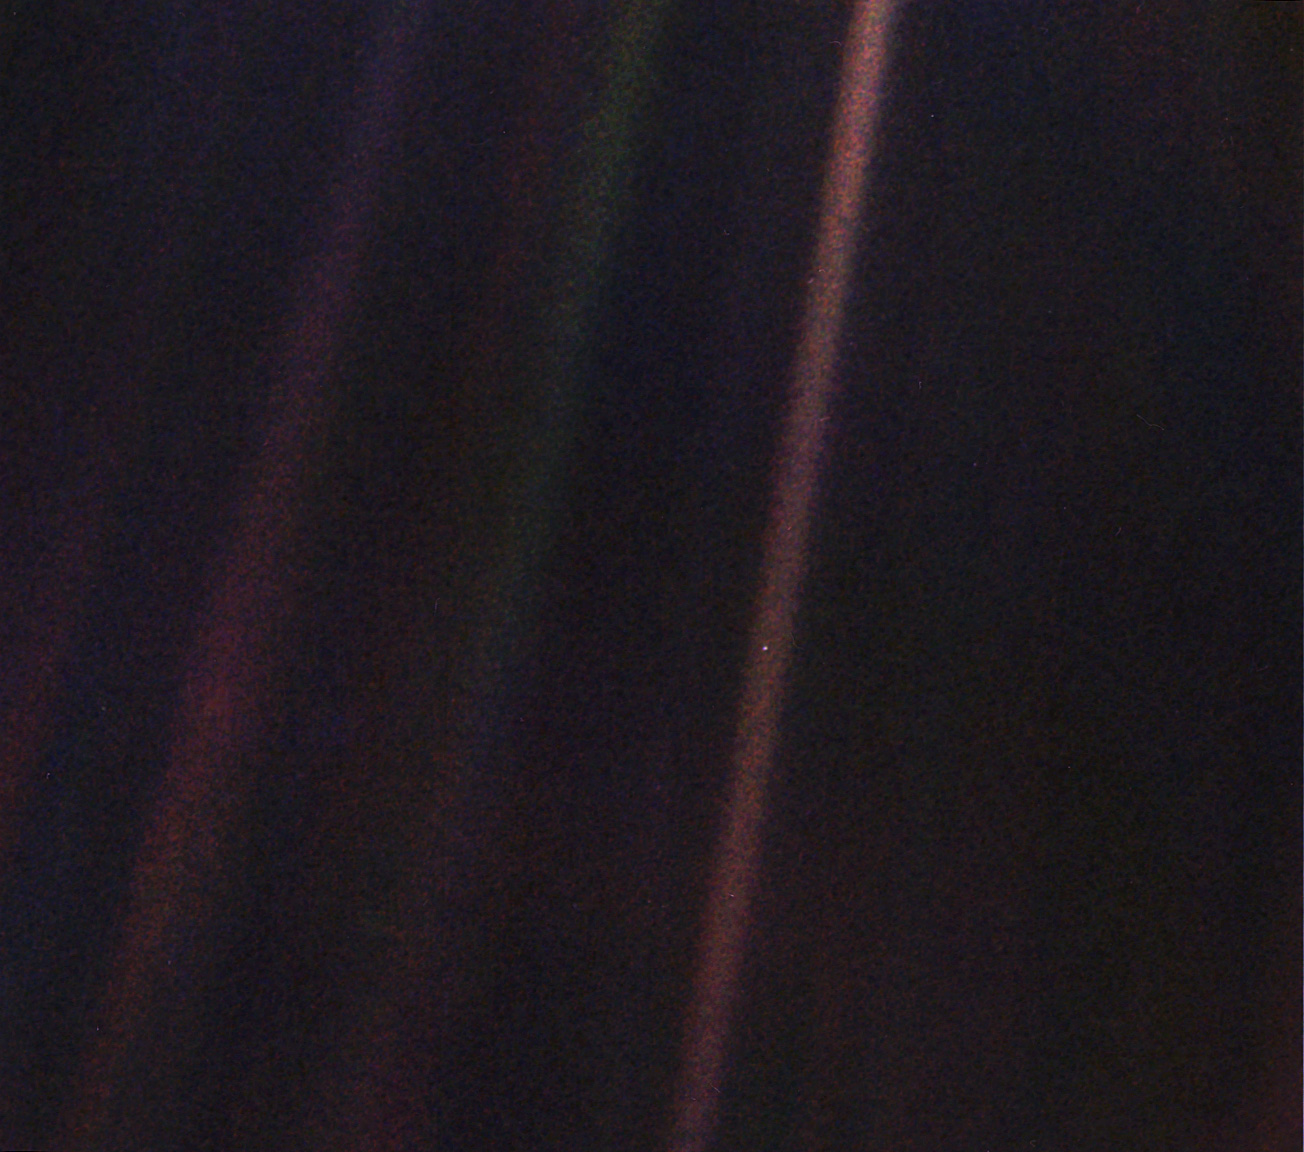 Coronavirus and the pale blue dot photo remind us how small we are